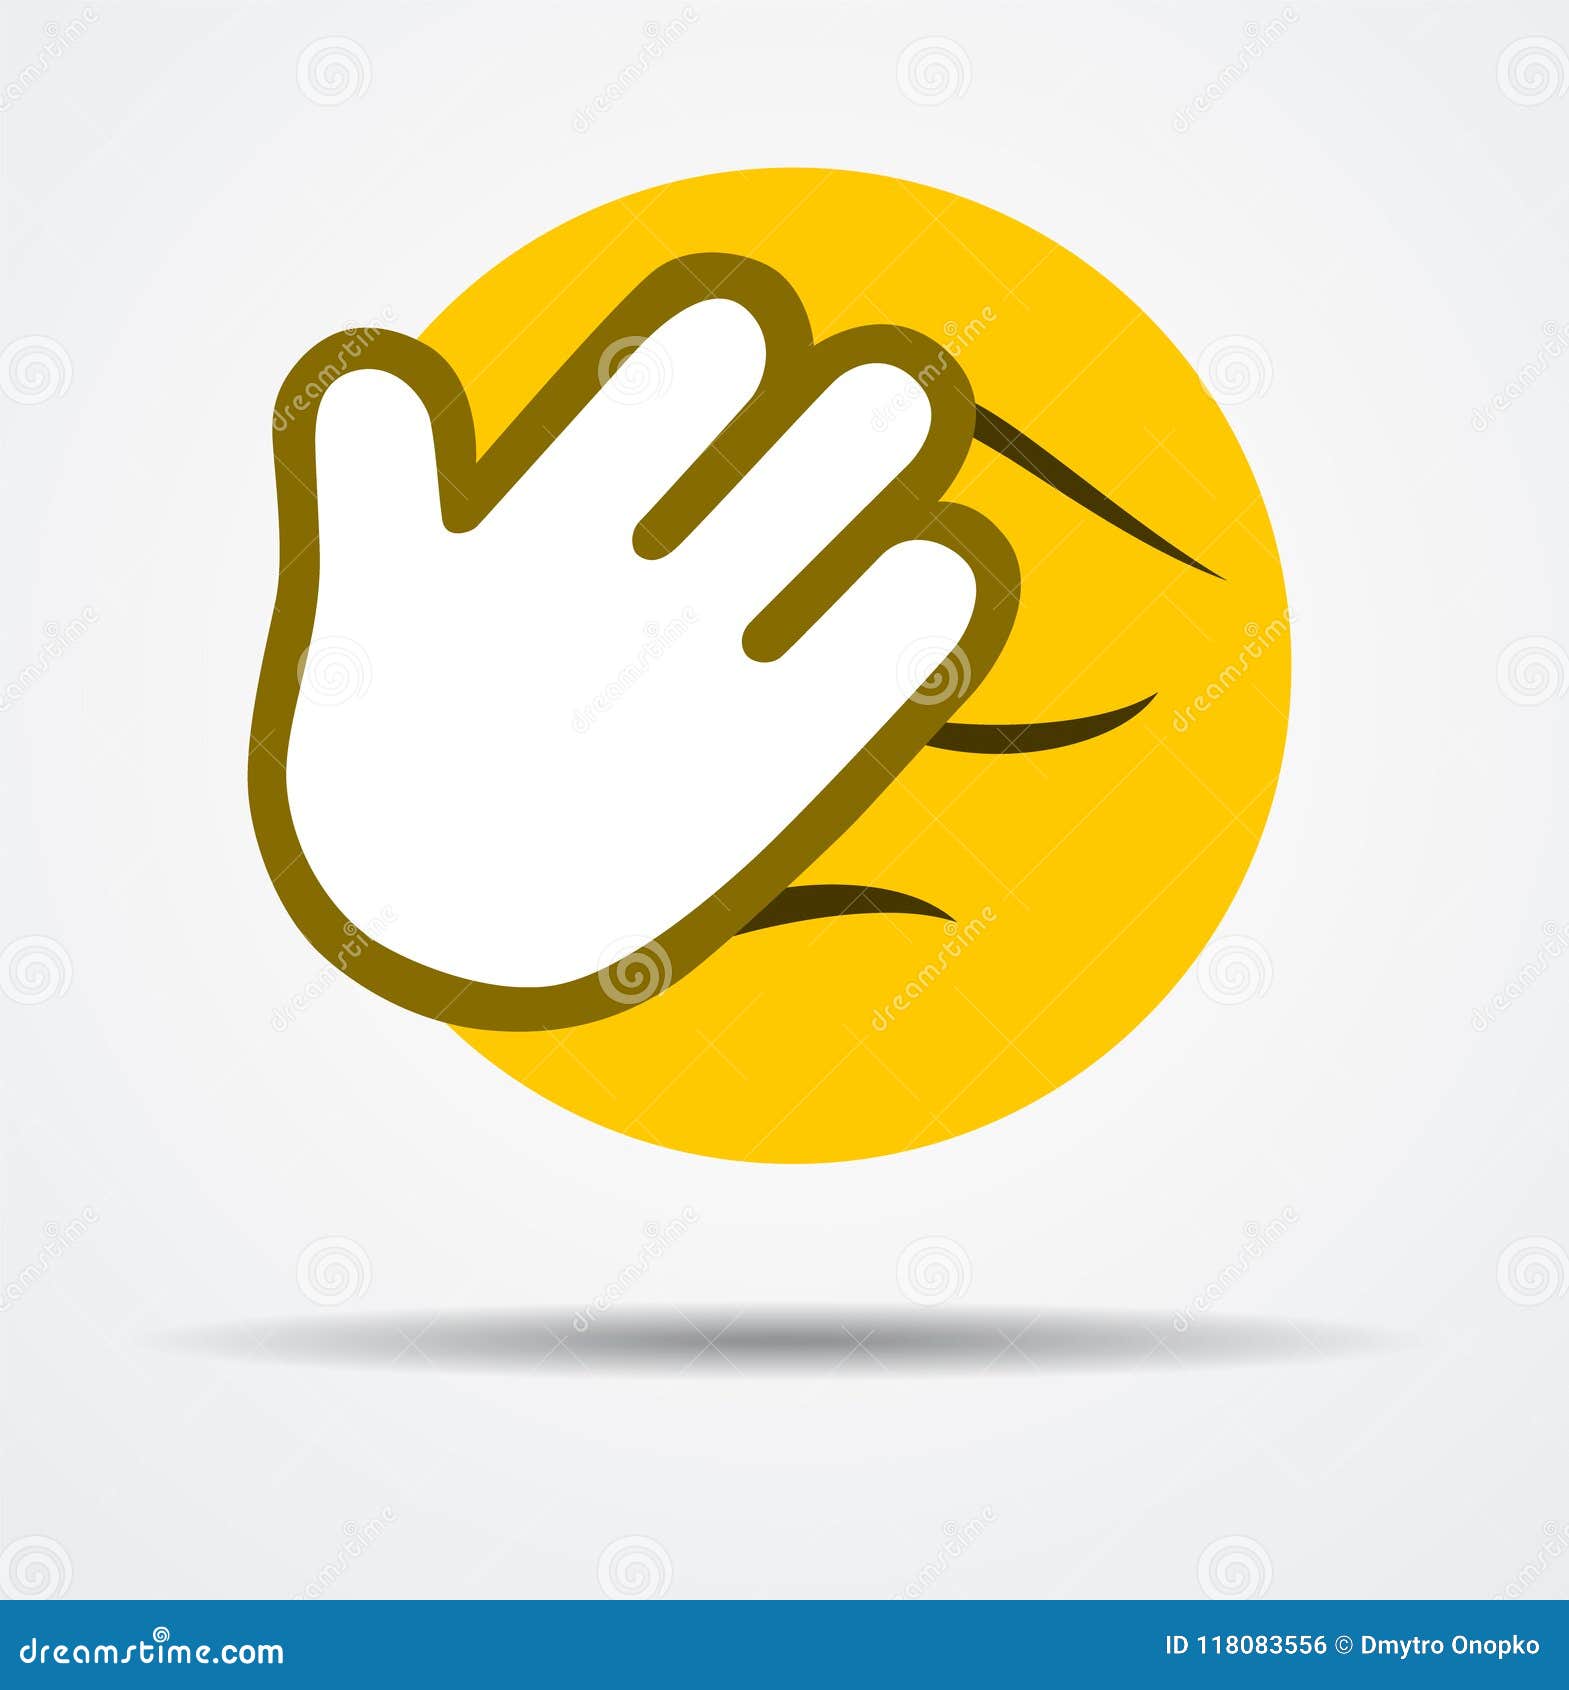 Isolated Facepalm Emoticon In A Flat Design Stock Vector Illustration Of Character Emotion